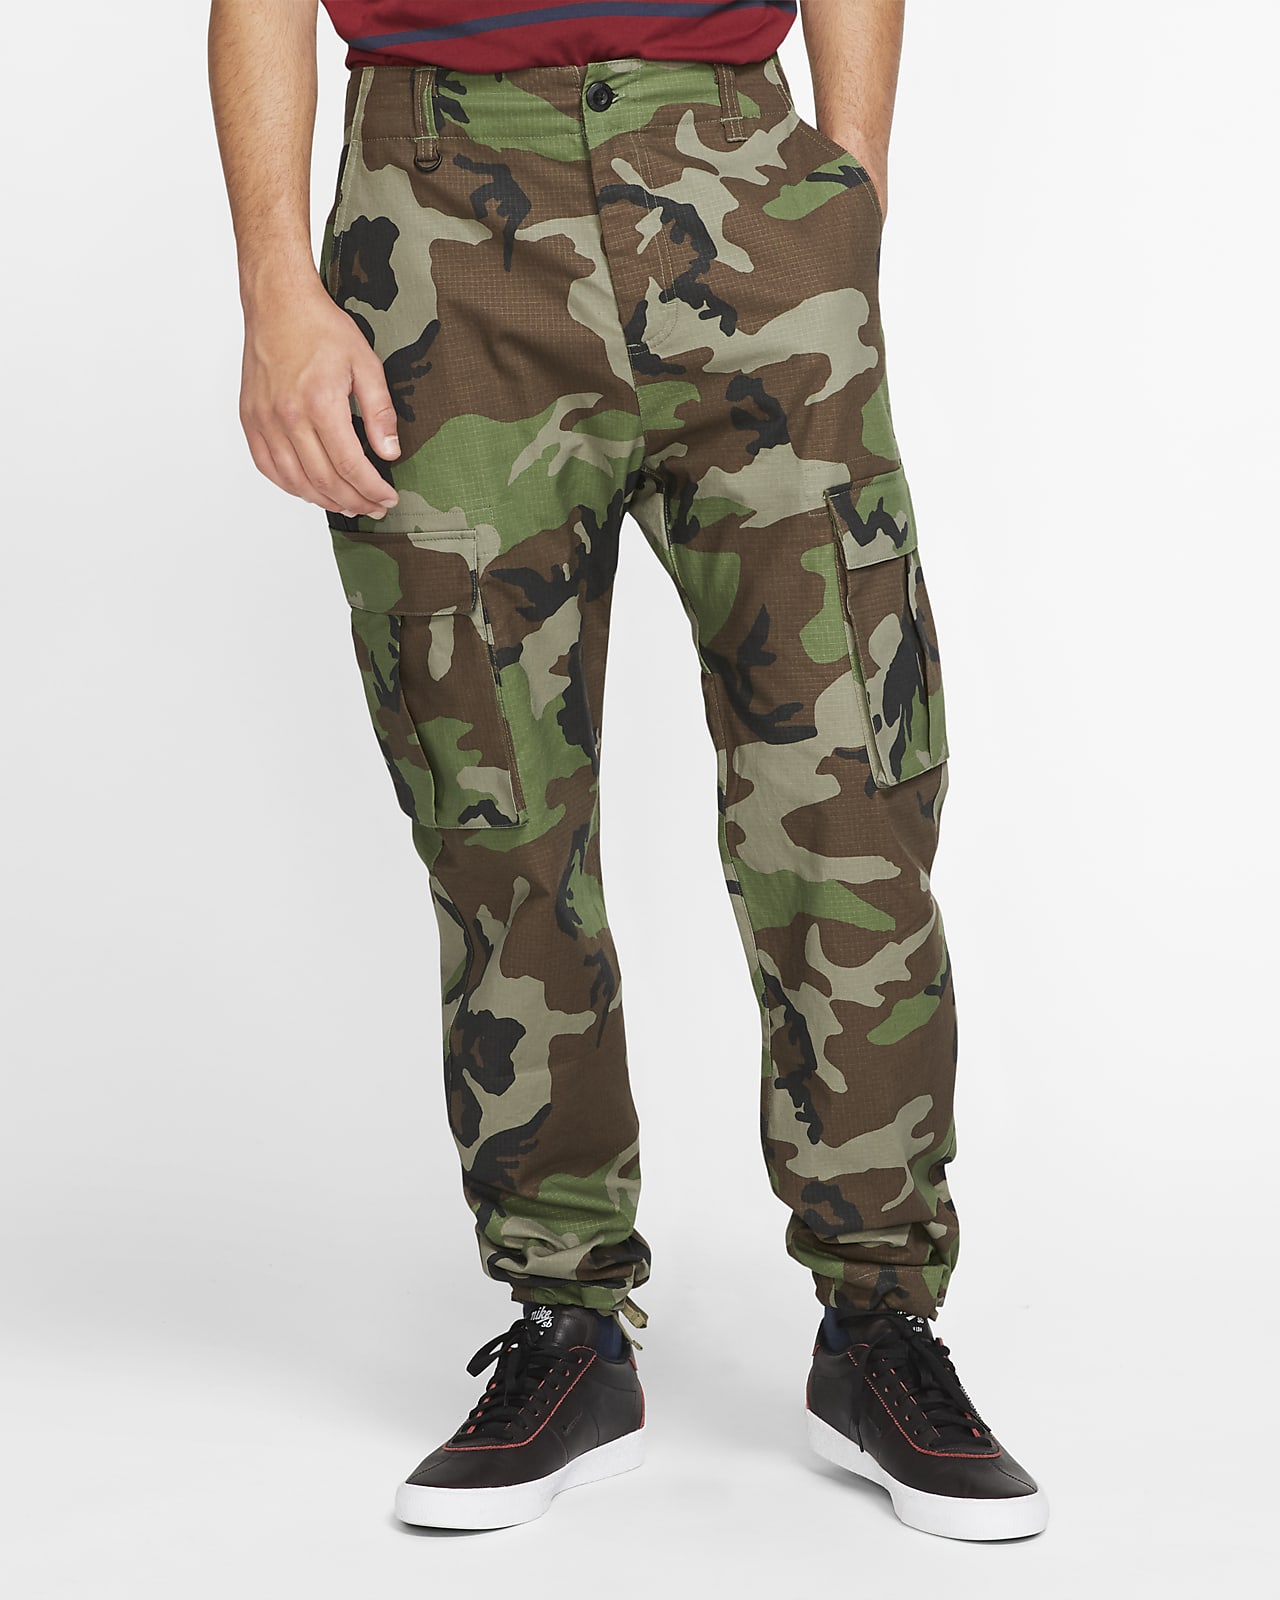 mens military camouflage pants